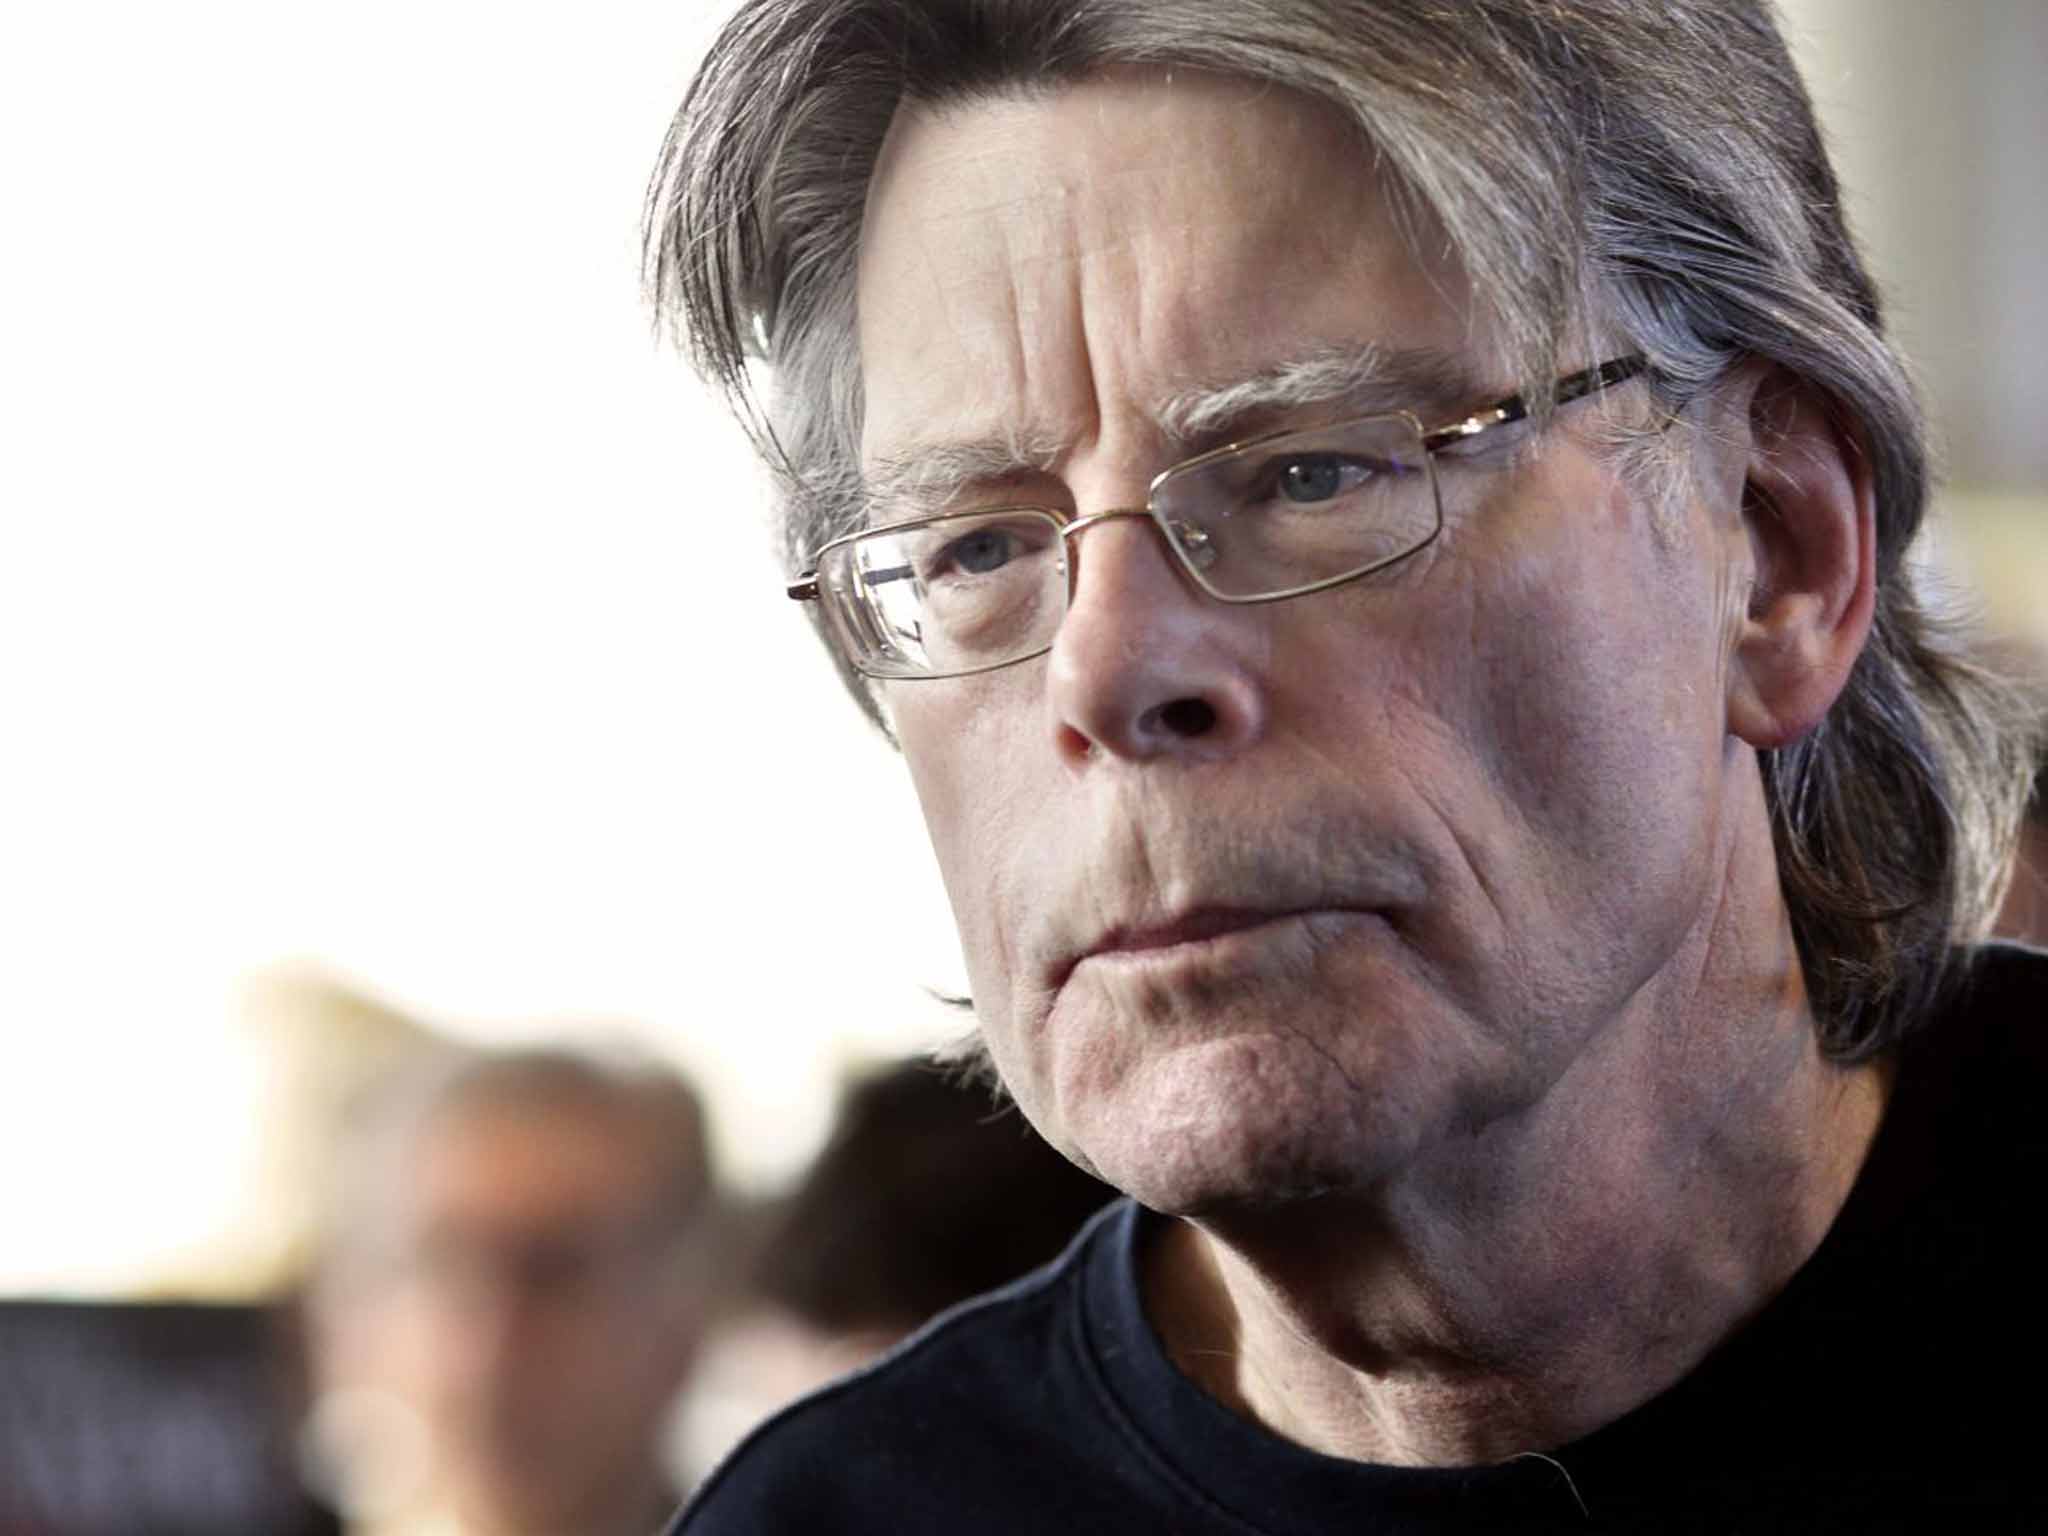 Stephen King's 'The Eye of the Dragon' is one of his earliest fantasy works